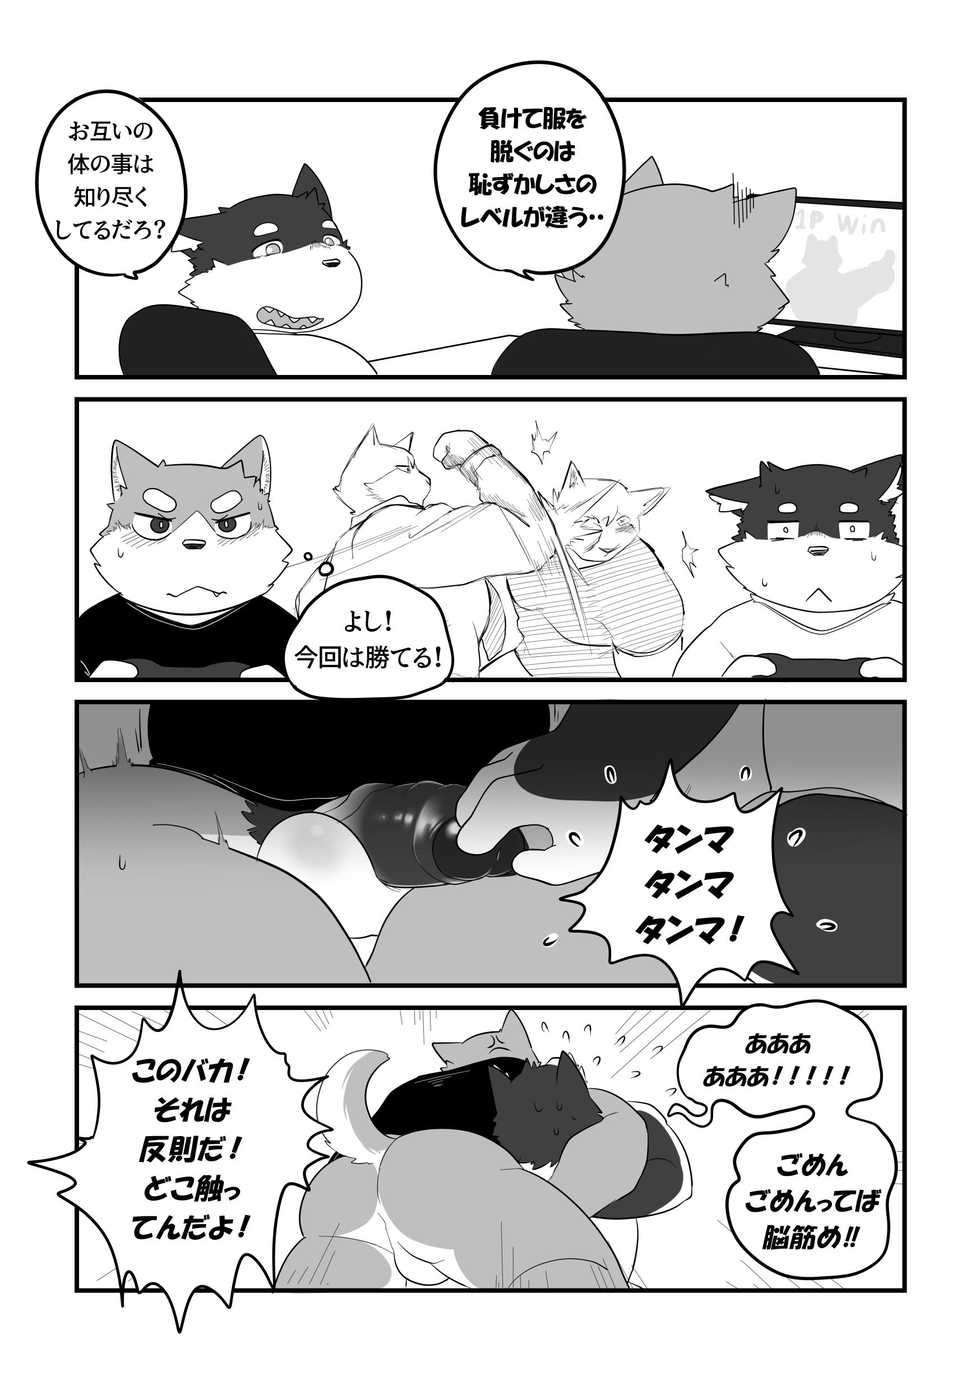 [Bighornsheep] Daily Life in Winter [Japanese] - Page 4